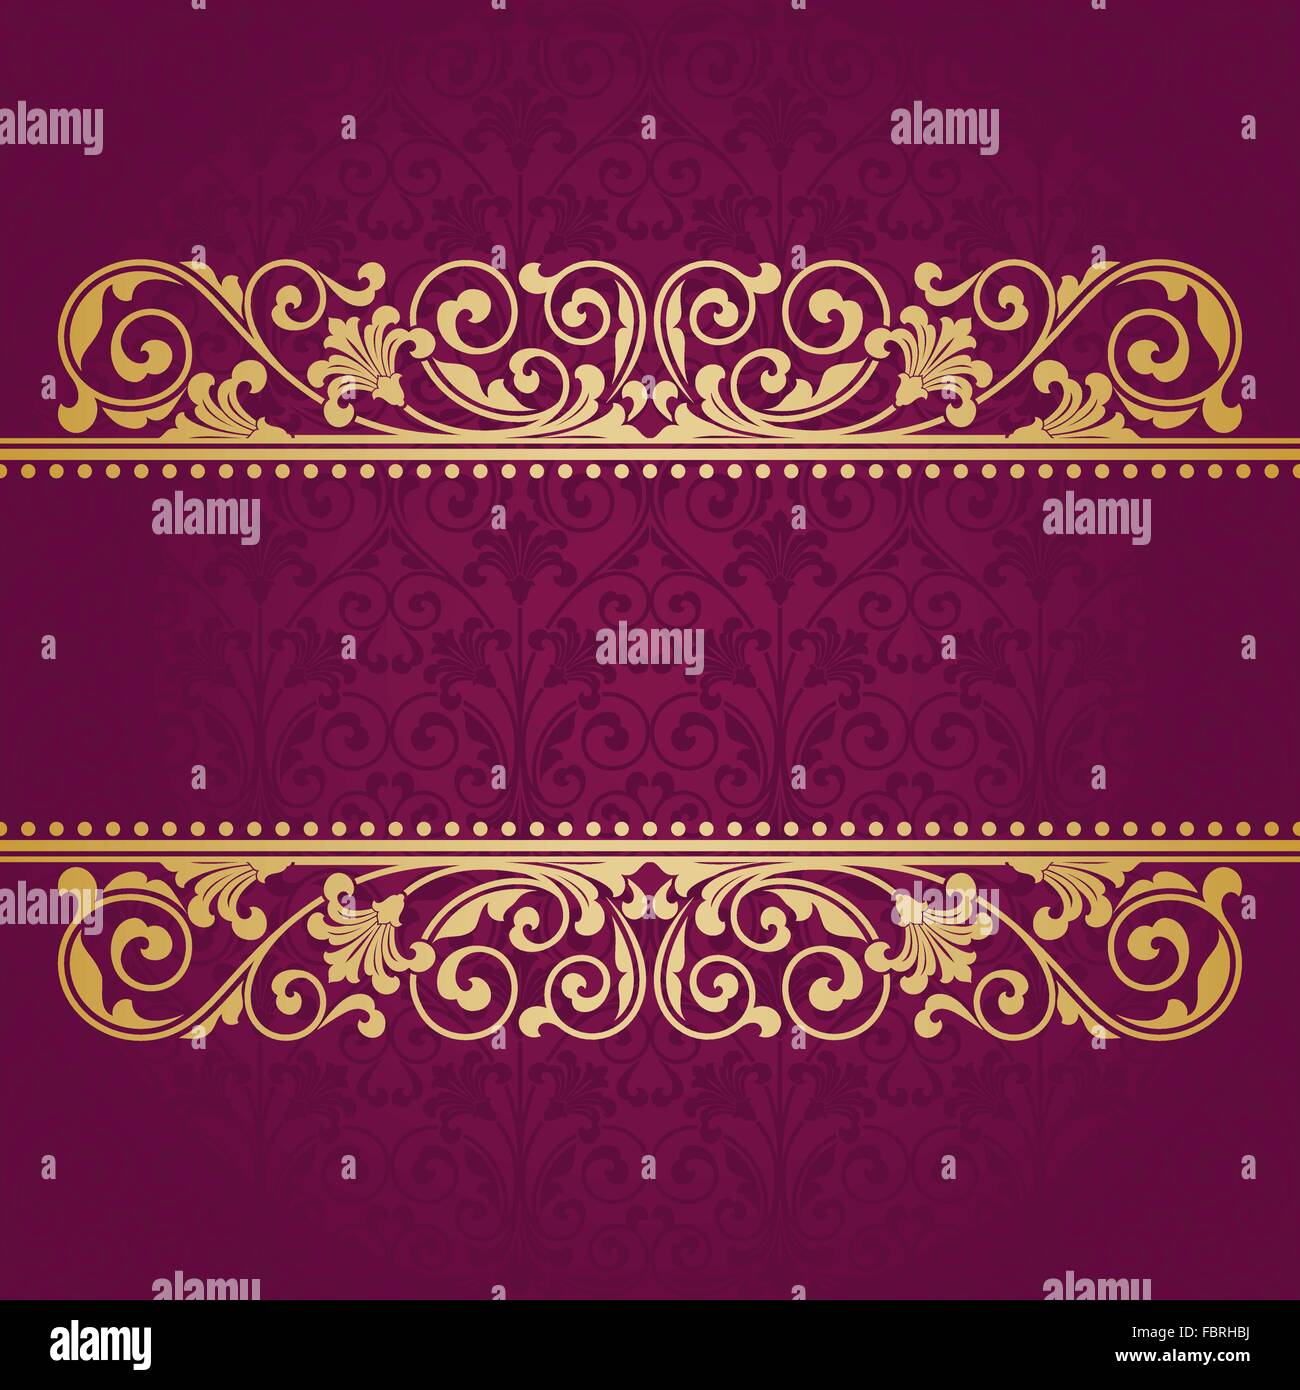 Floral pattern for invitation card. Stock Vector